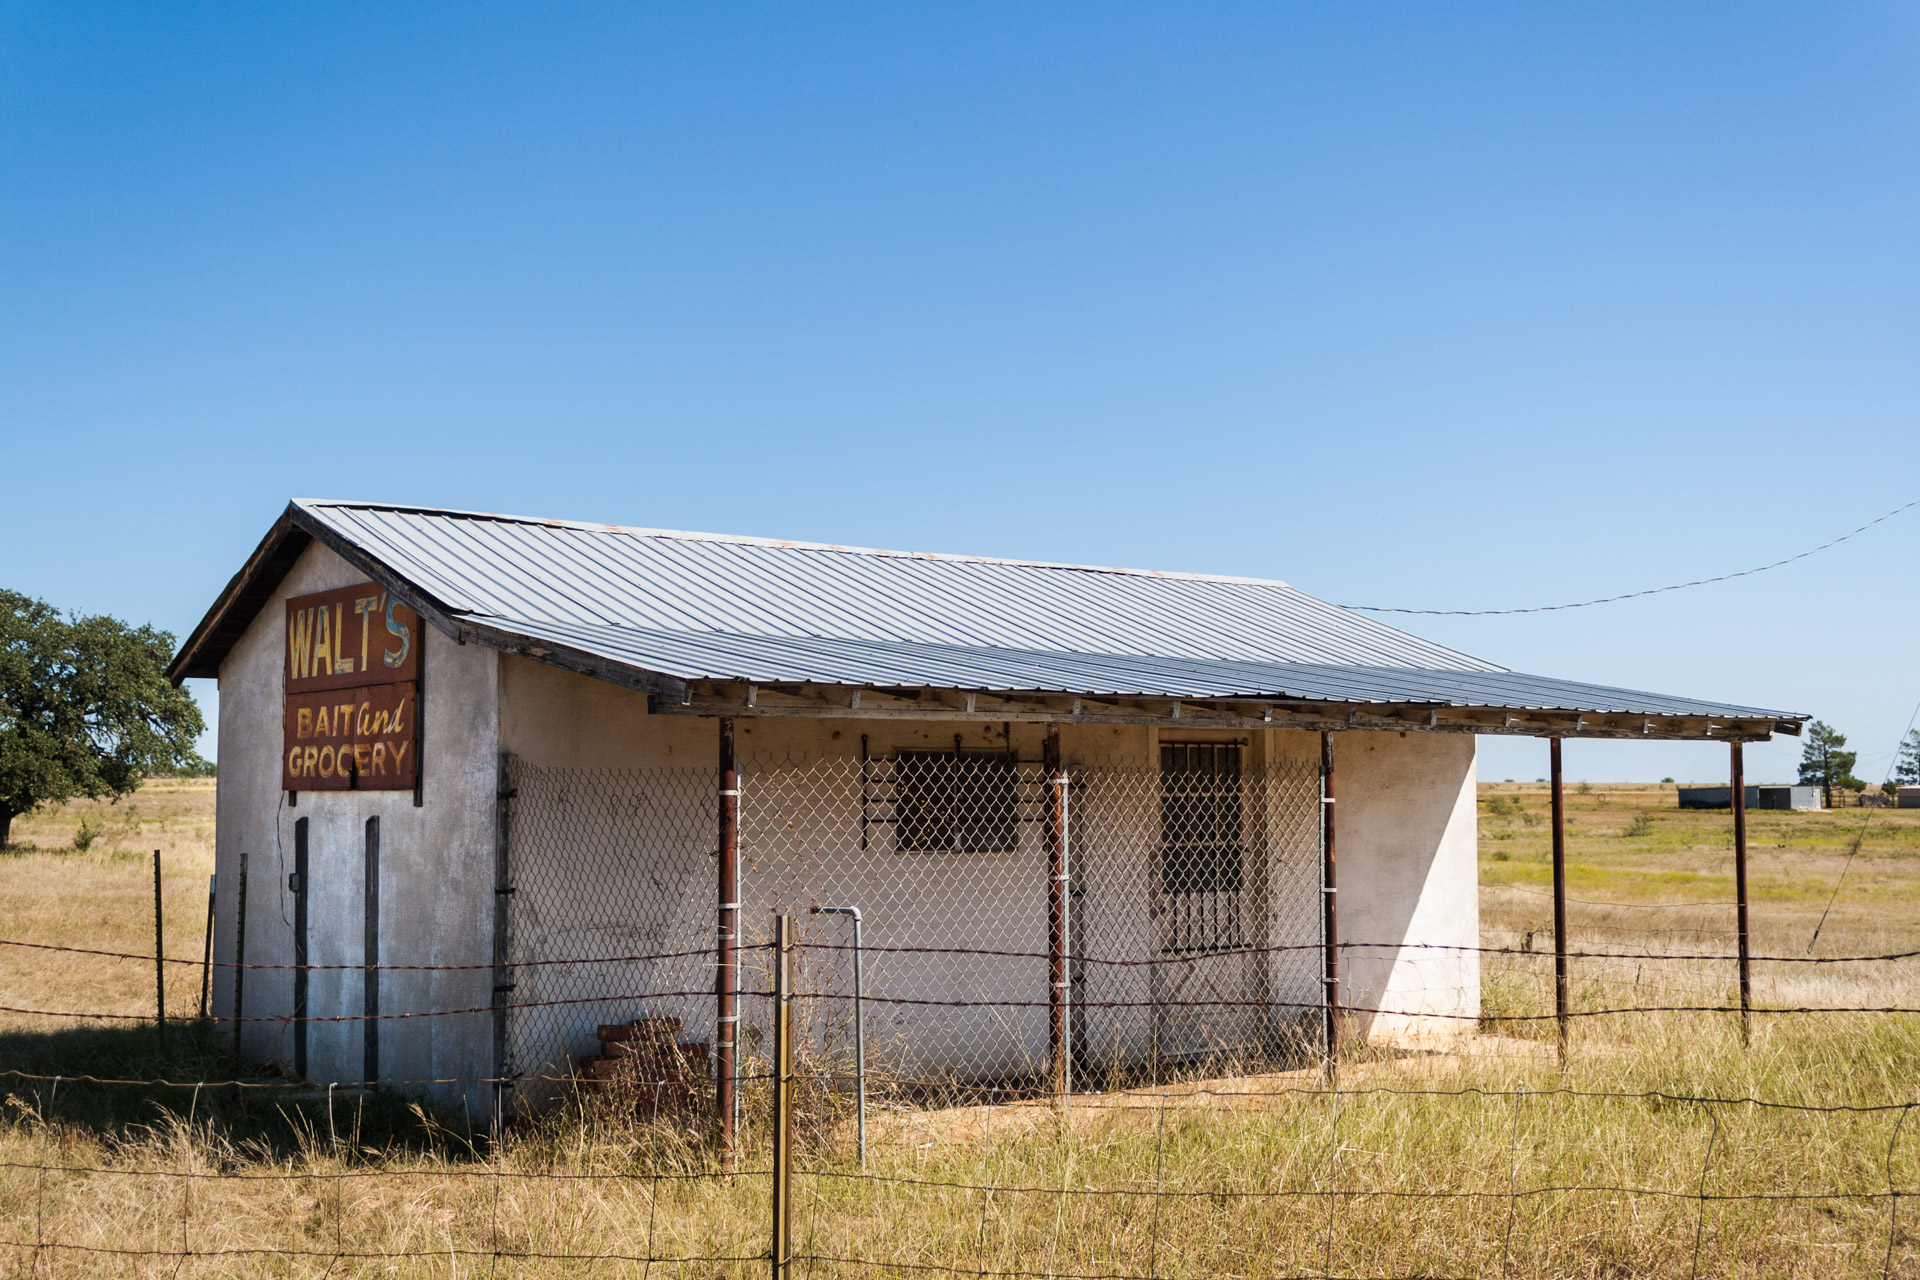 Coleman, Texas - Walt's Bait and Grocery (side far)